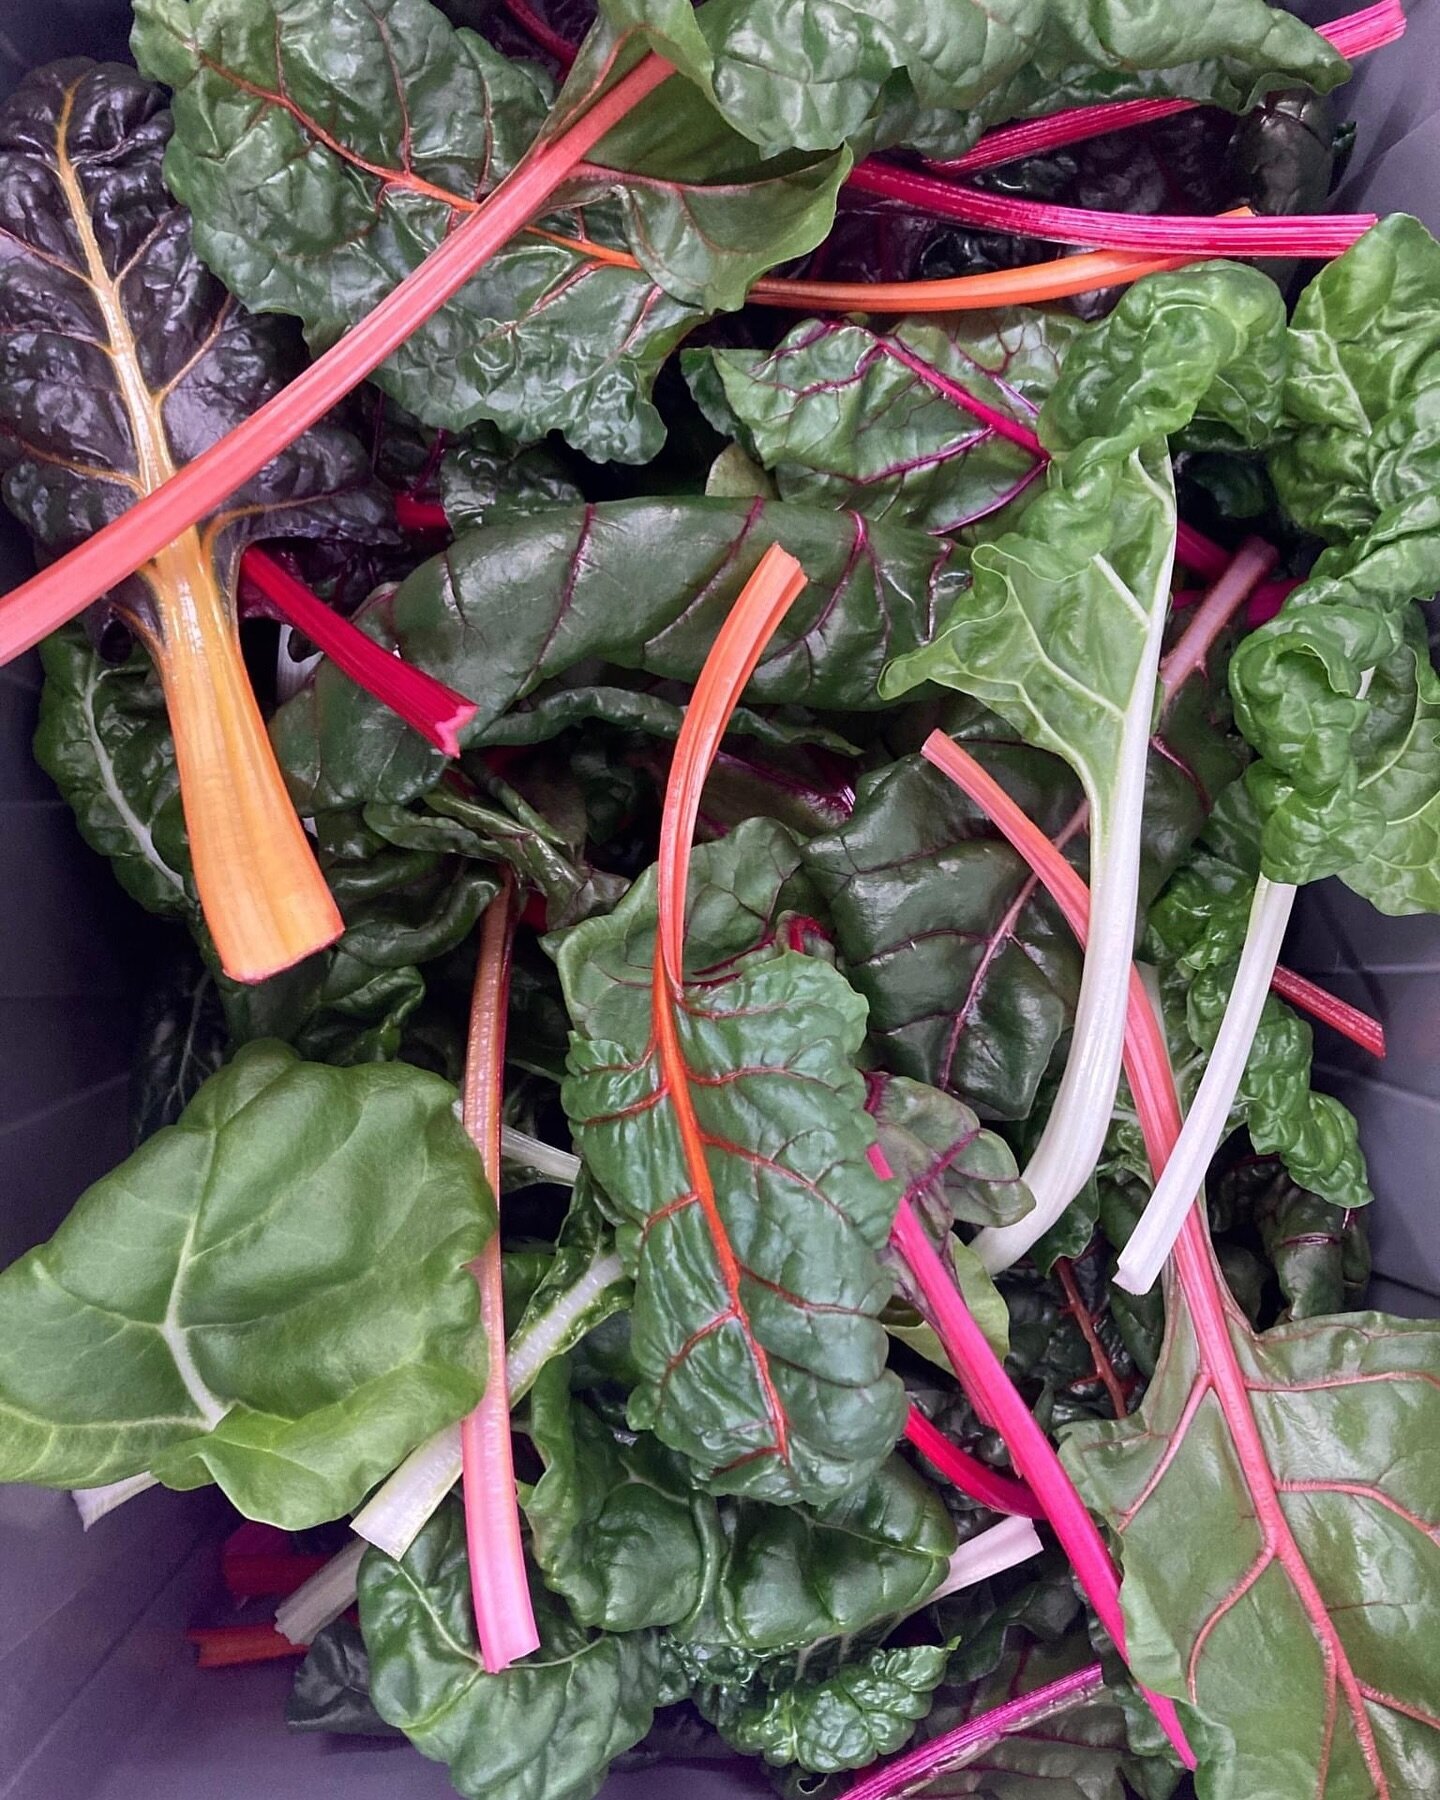 It&rsquo;s a beautiful day for a farmers&rsquo; market. Come see Sonja and Jenner at the QC Farmers&rsquo; Market at Schweibert Park from 10-12 today. They will have colorful Swiss Chard. 

What does one do with Swiss Chard? So many things! https://w